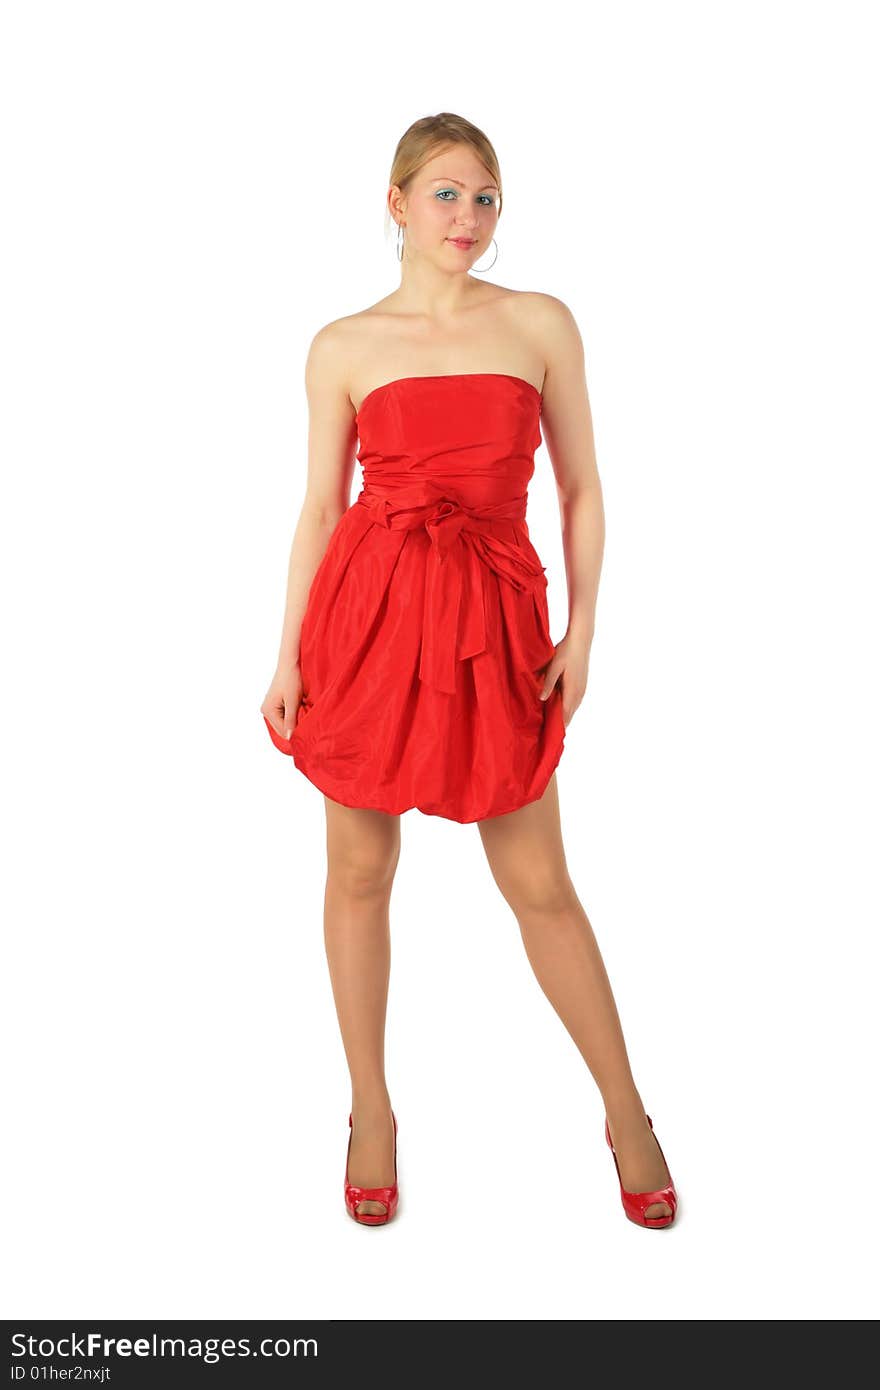 Young blonde girl in red dress and shoes on white background